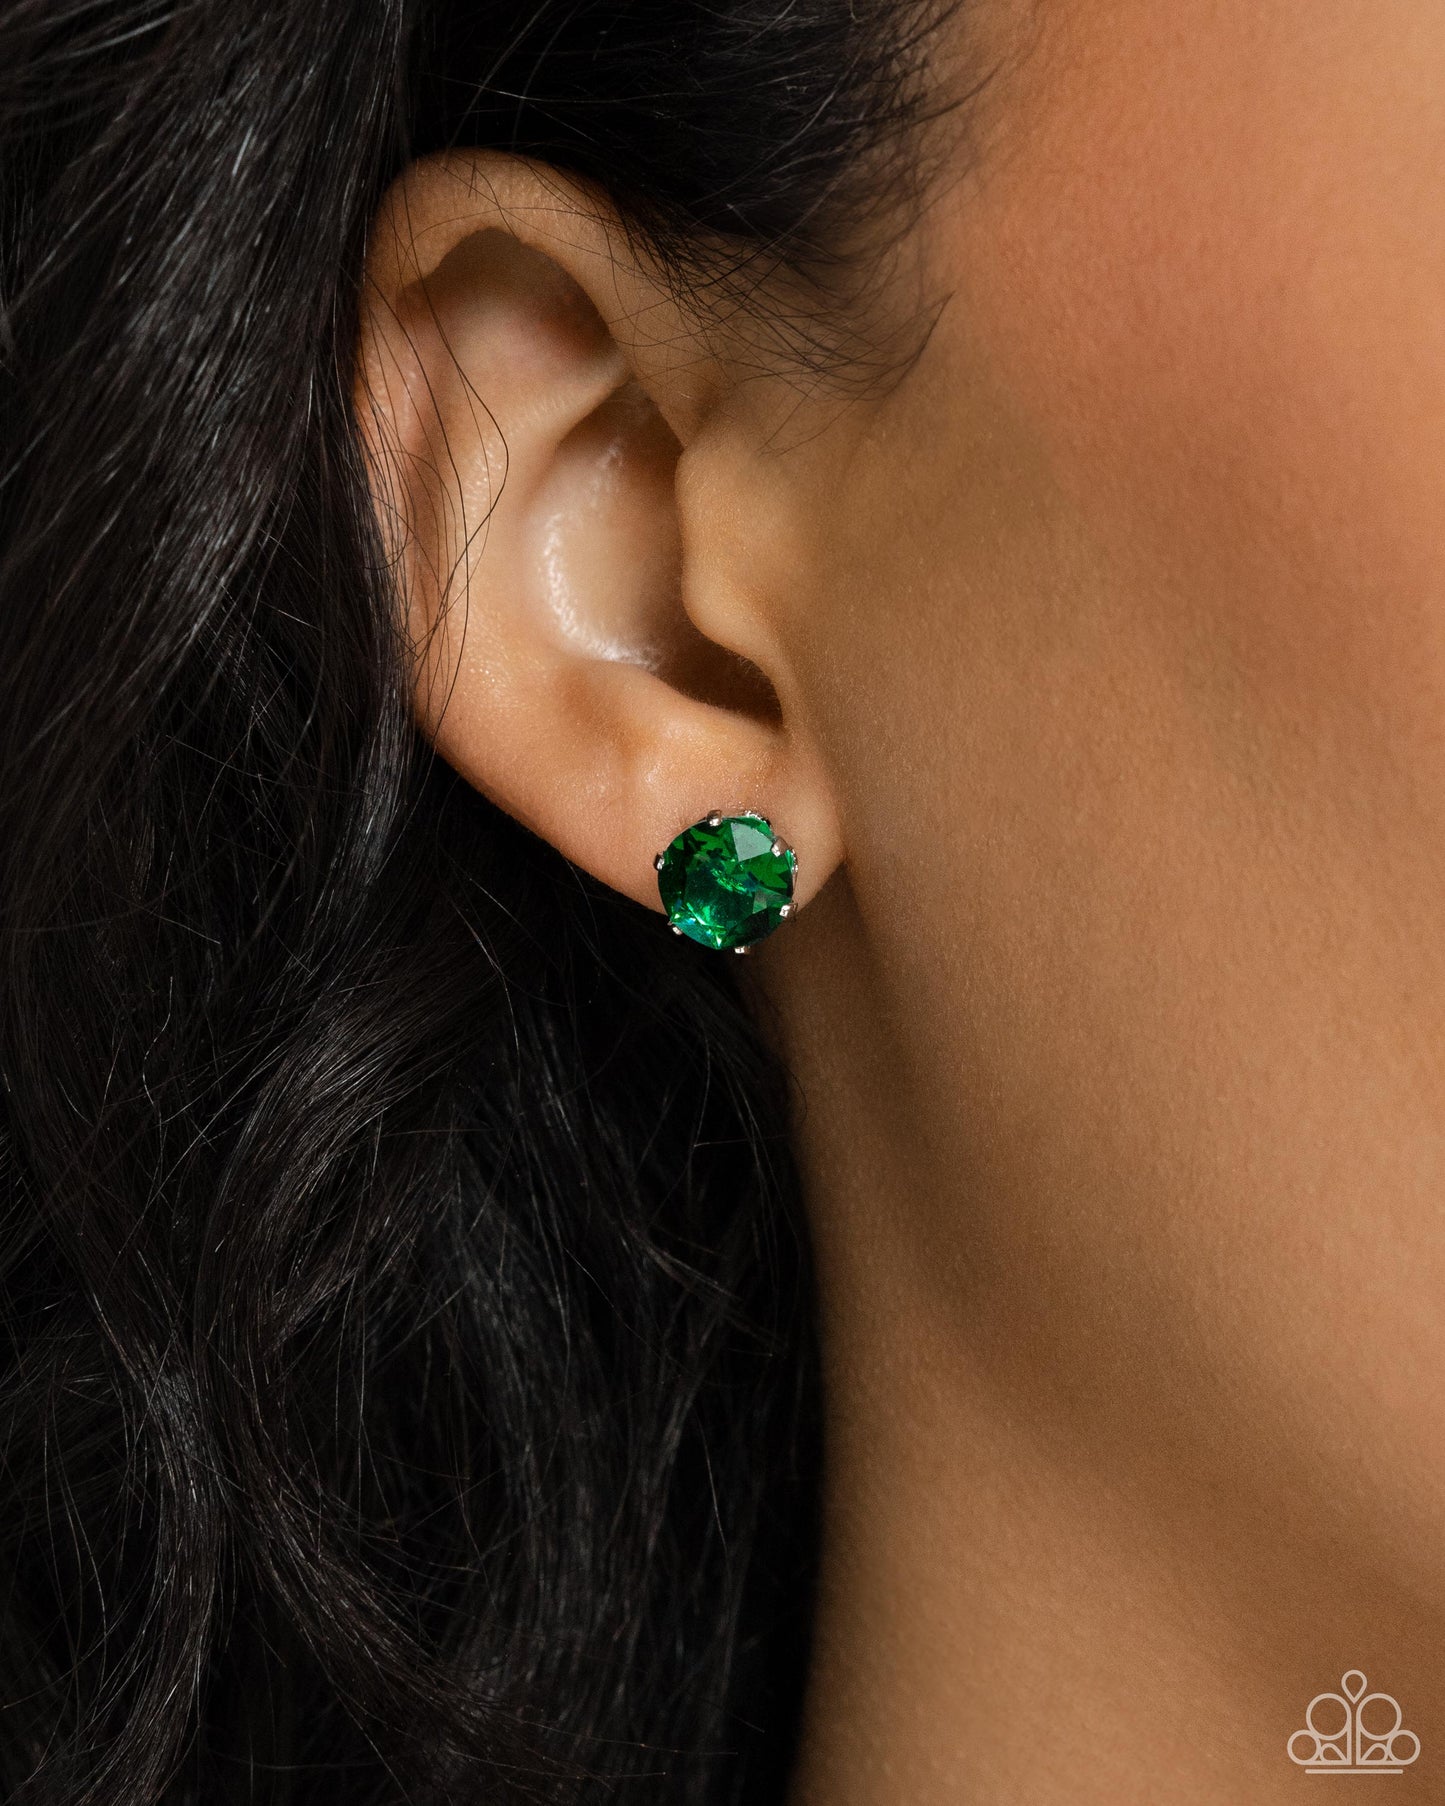 Breathtaking Birthstone Emerald Green Post Earring - Paparazzi Accessories  A sparkling emerald rhinestone is nestled inside a classic silver frame for a beautiful birthstone-inspired display. Earring attaches to a standard post fitting.  Sold as one pair of post earrings.  P5PO-GRXX-051TZ